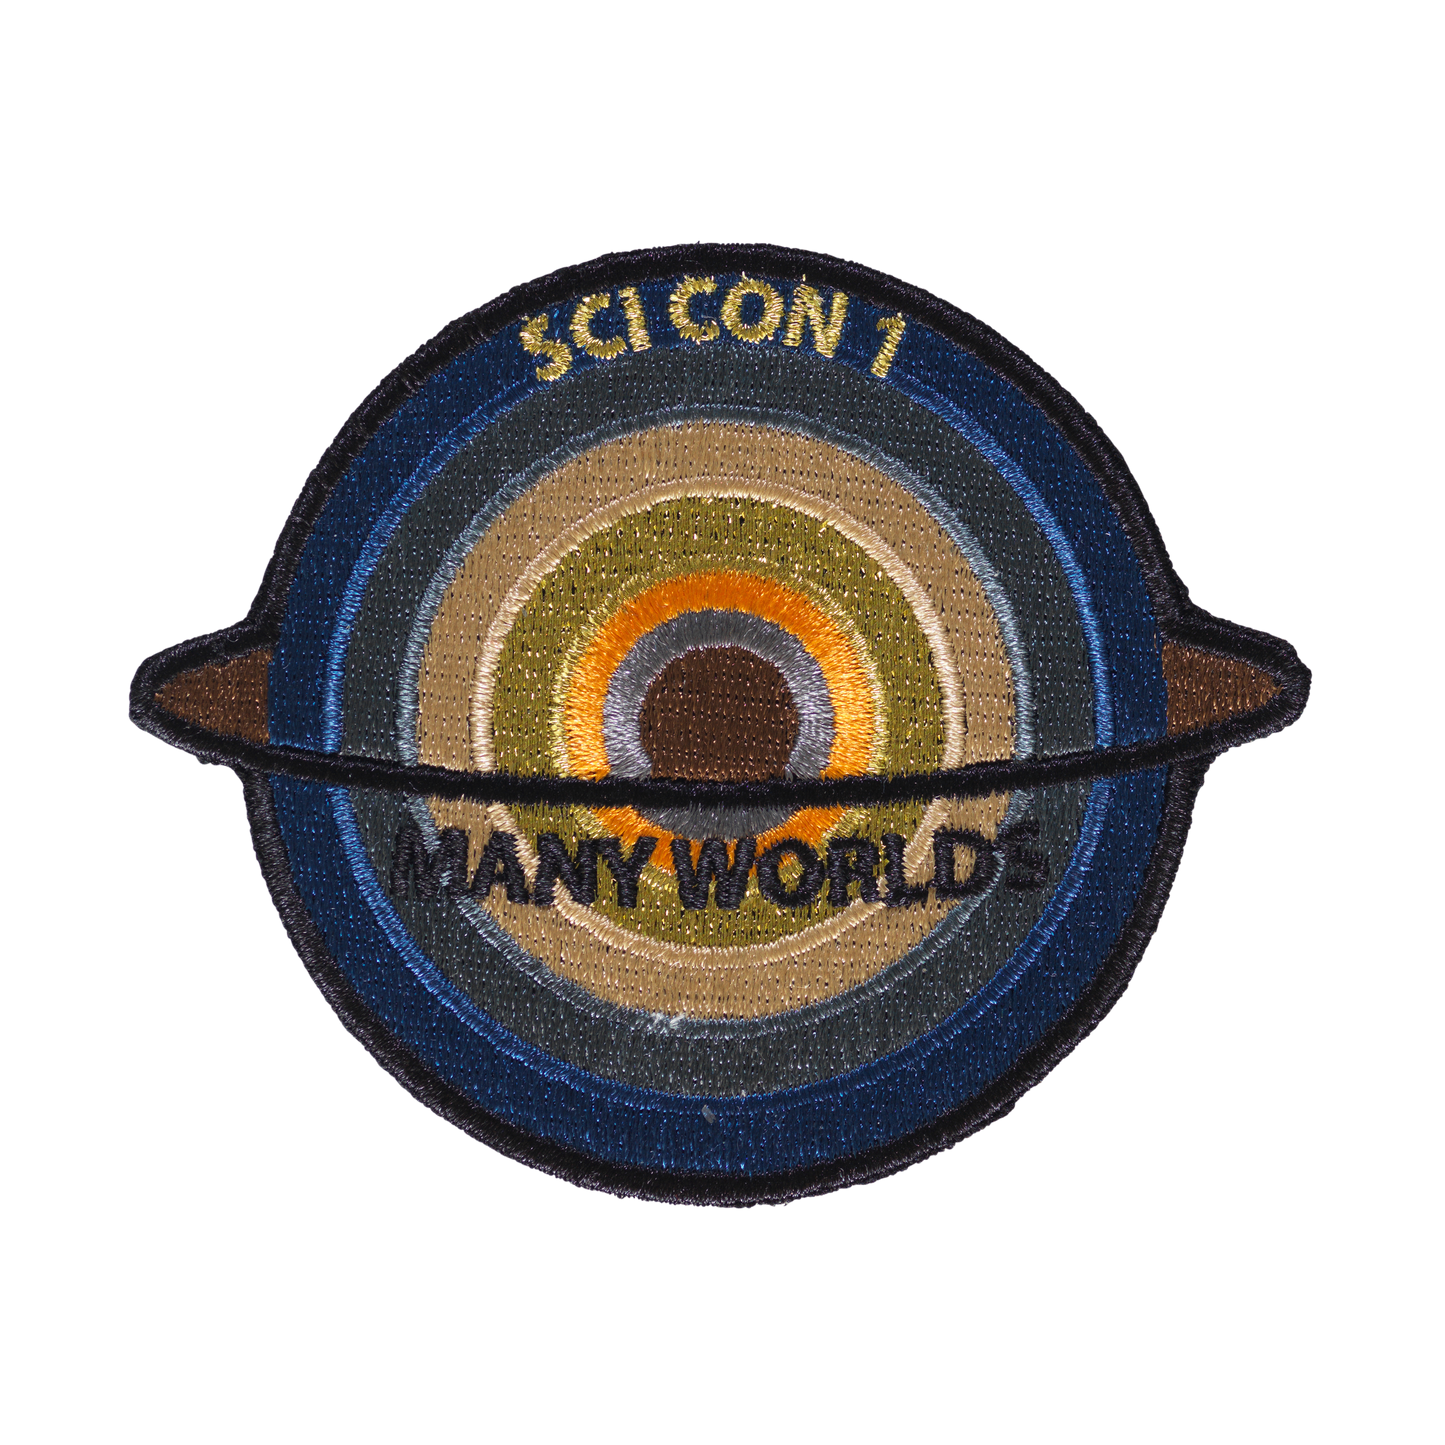 Scientific Controversies Patch: Many Worlds